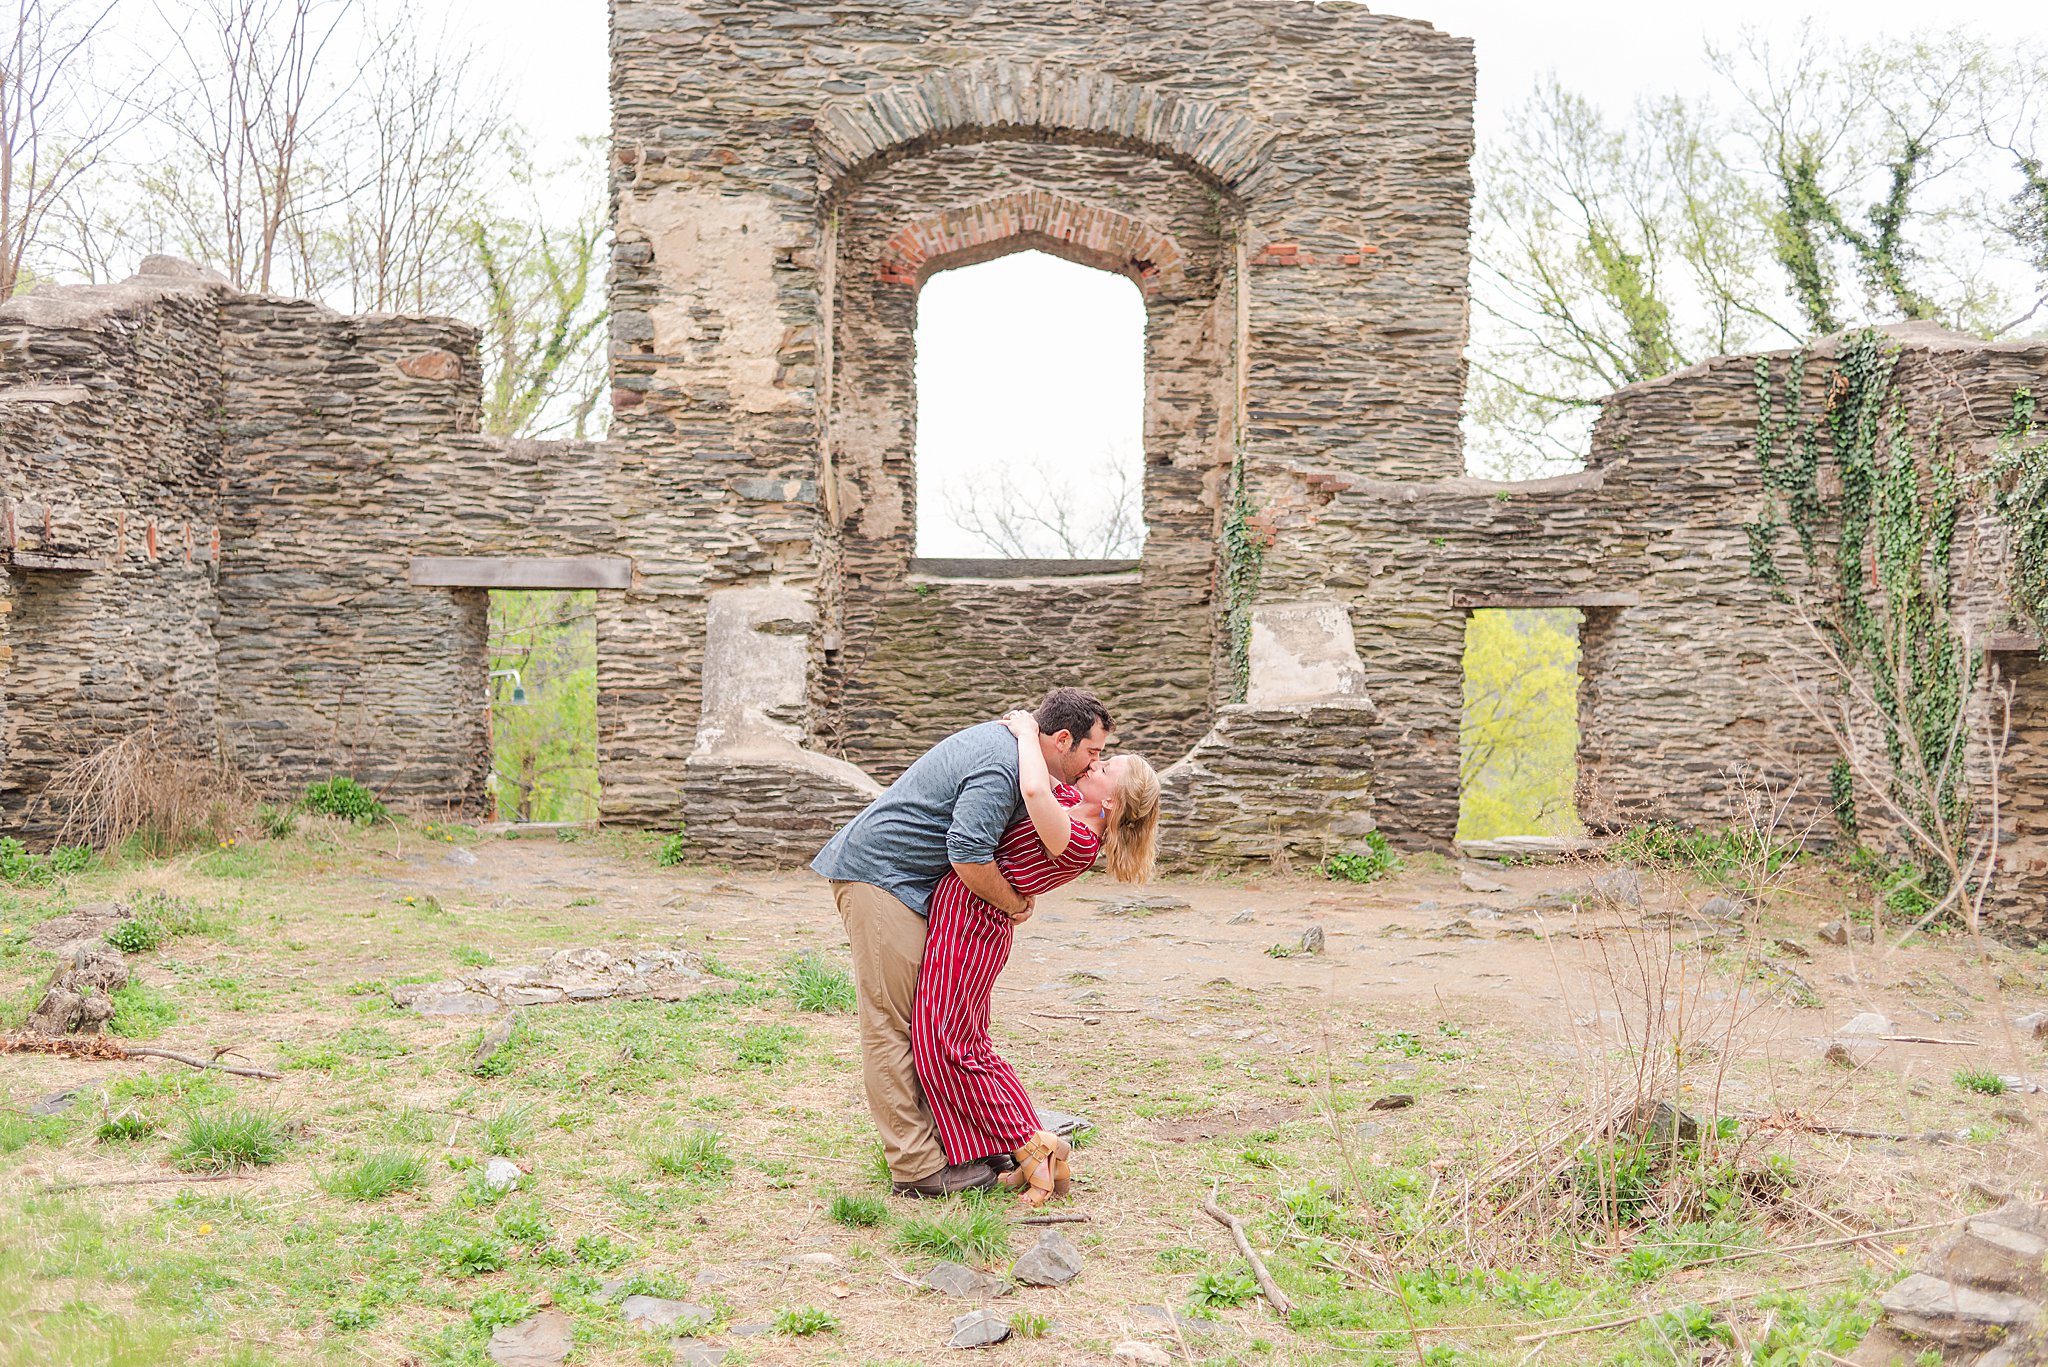 Couple kisses inside old church ruins in Harpers Ferry, West Virginia.